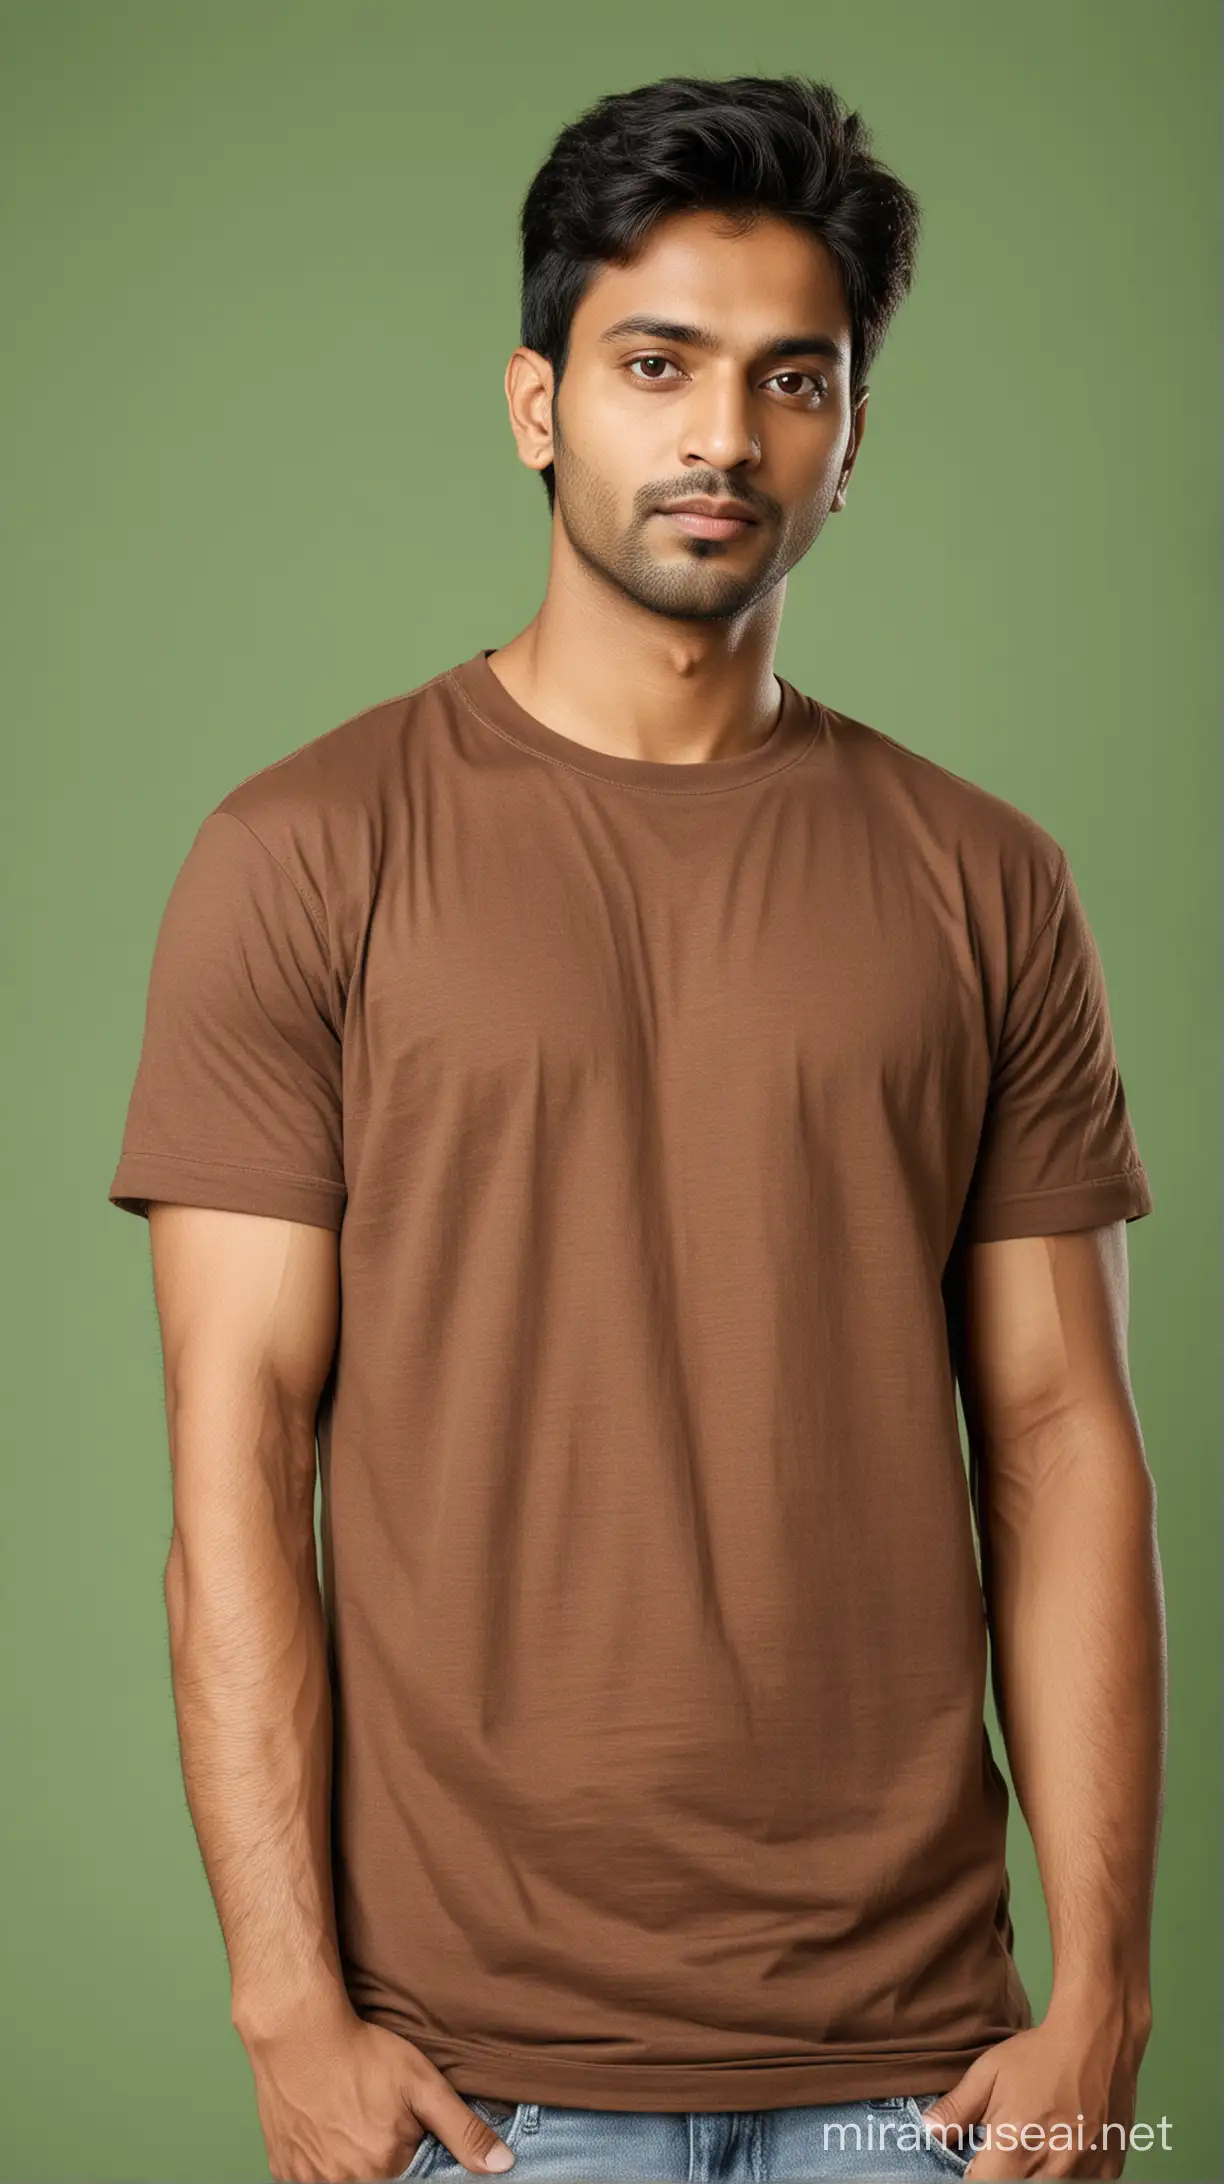 Indian Criminal in Brown TShirt Against Green Background